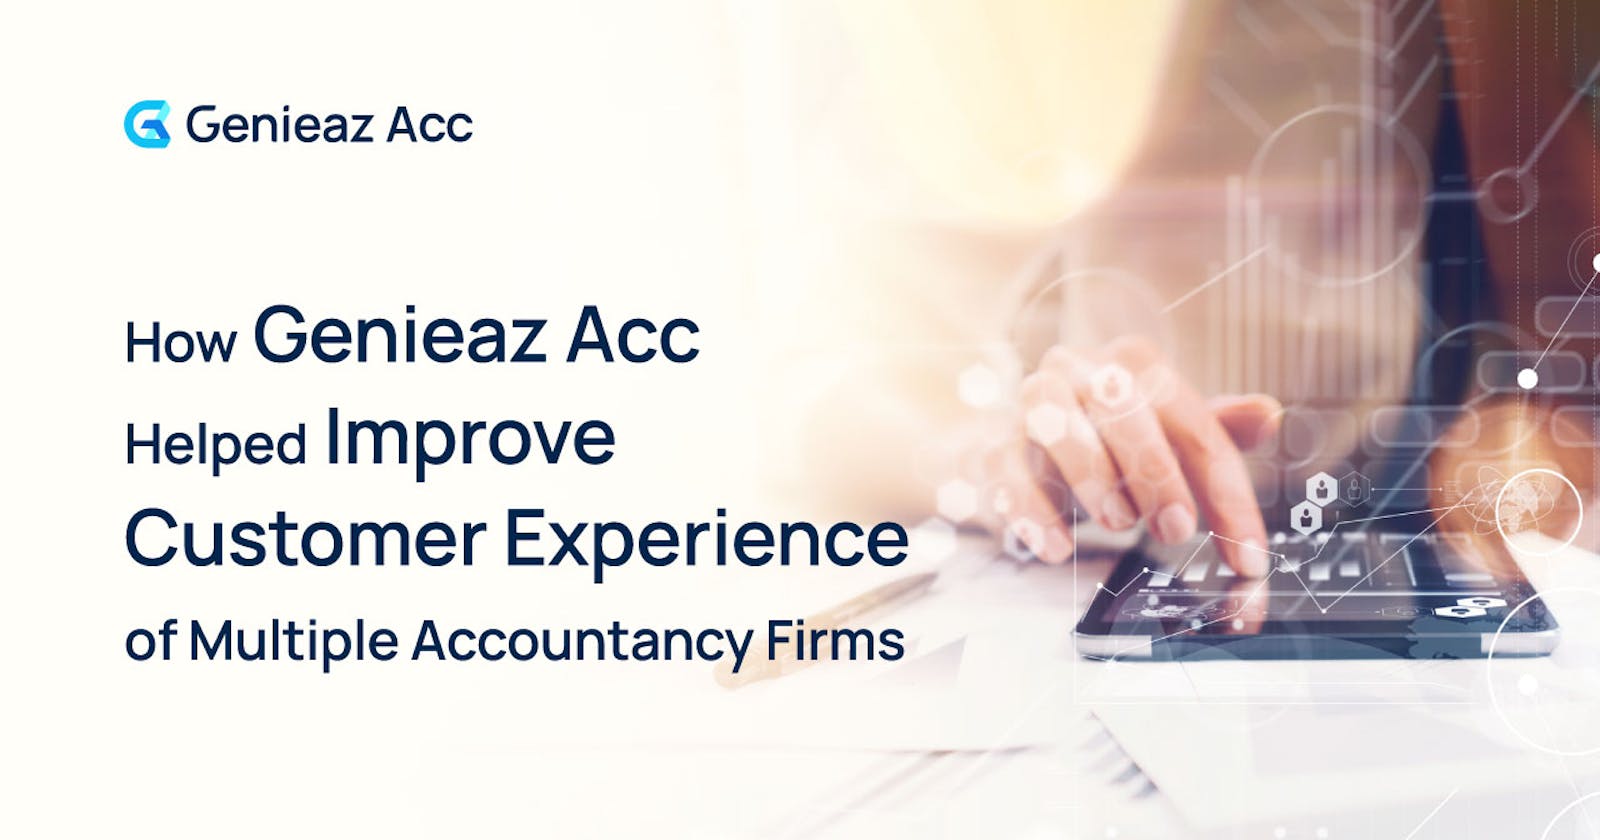 How Genieaz Acc Helped Improve Customer Experience of Multiple Accountancy Firms